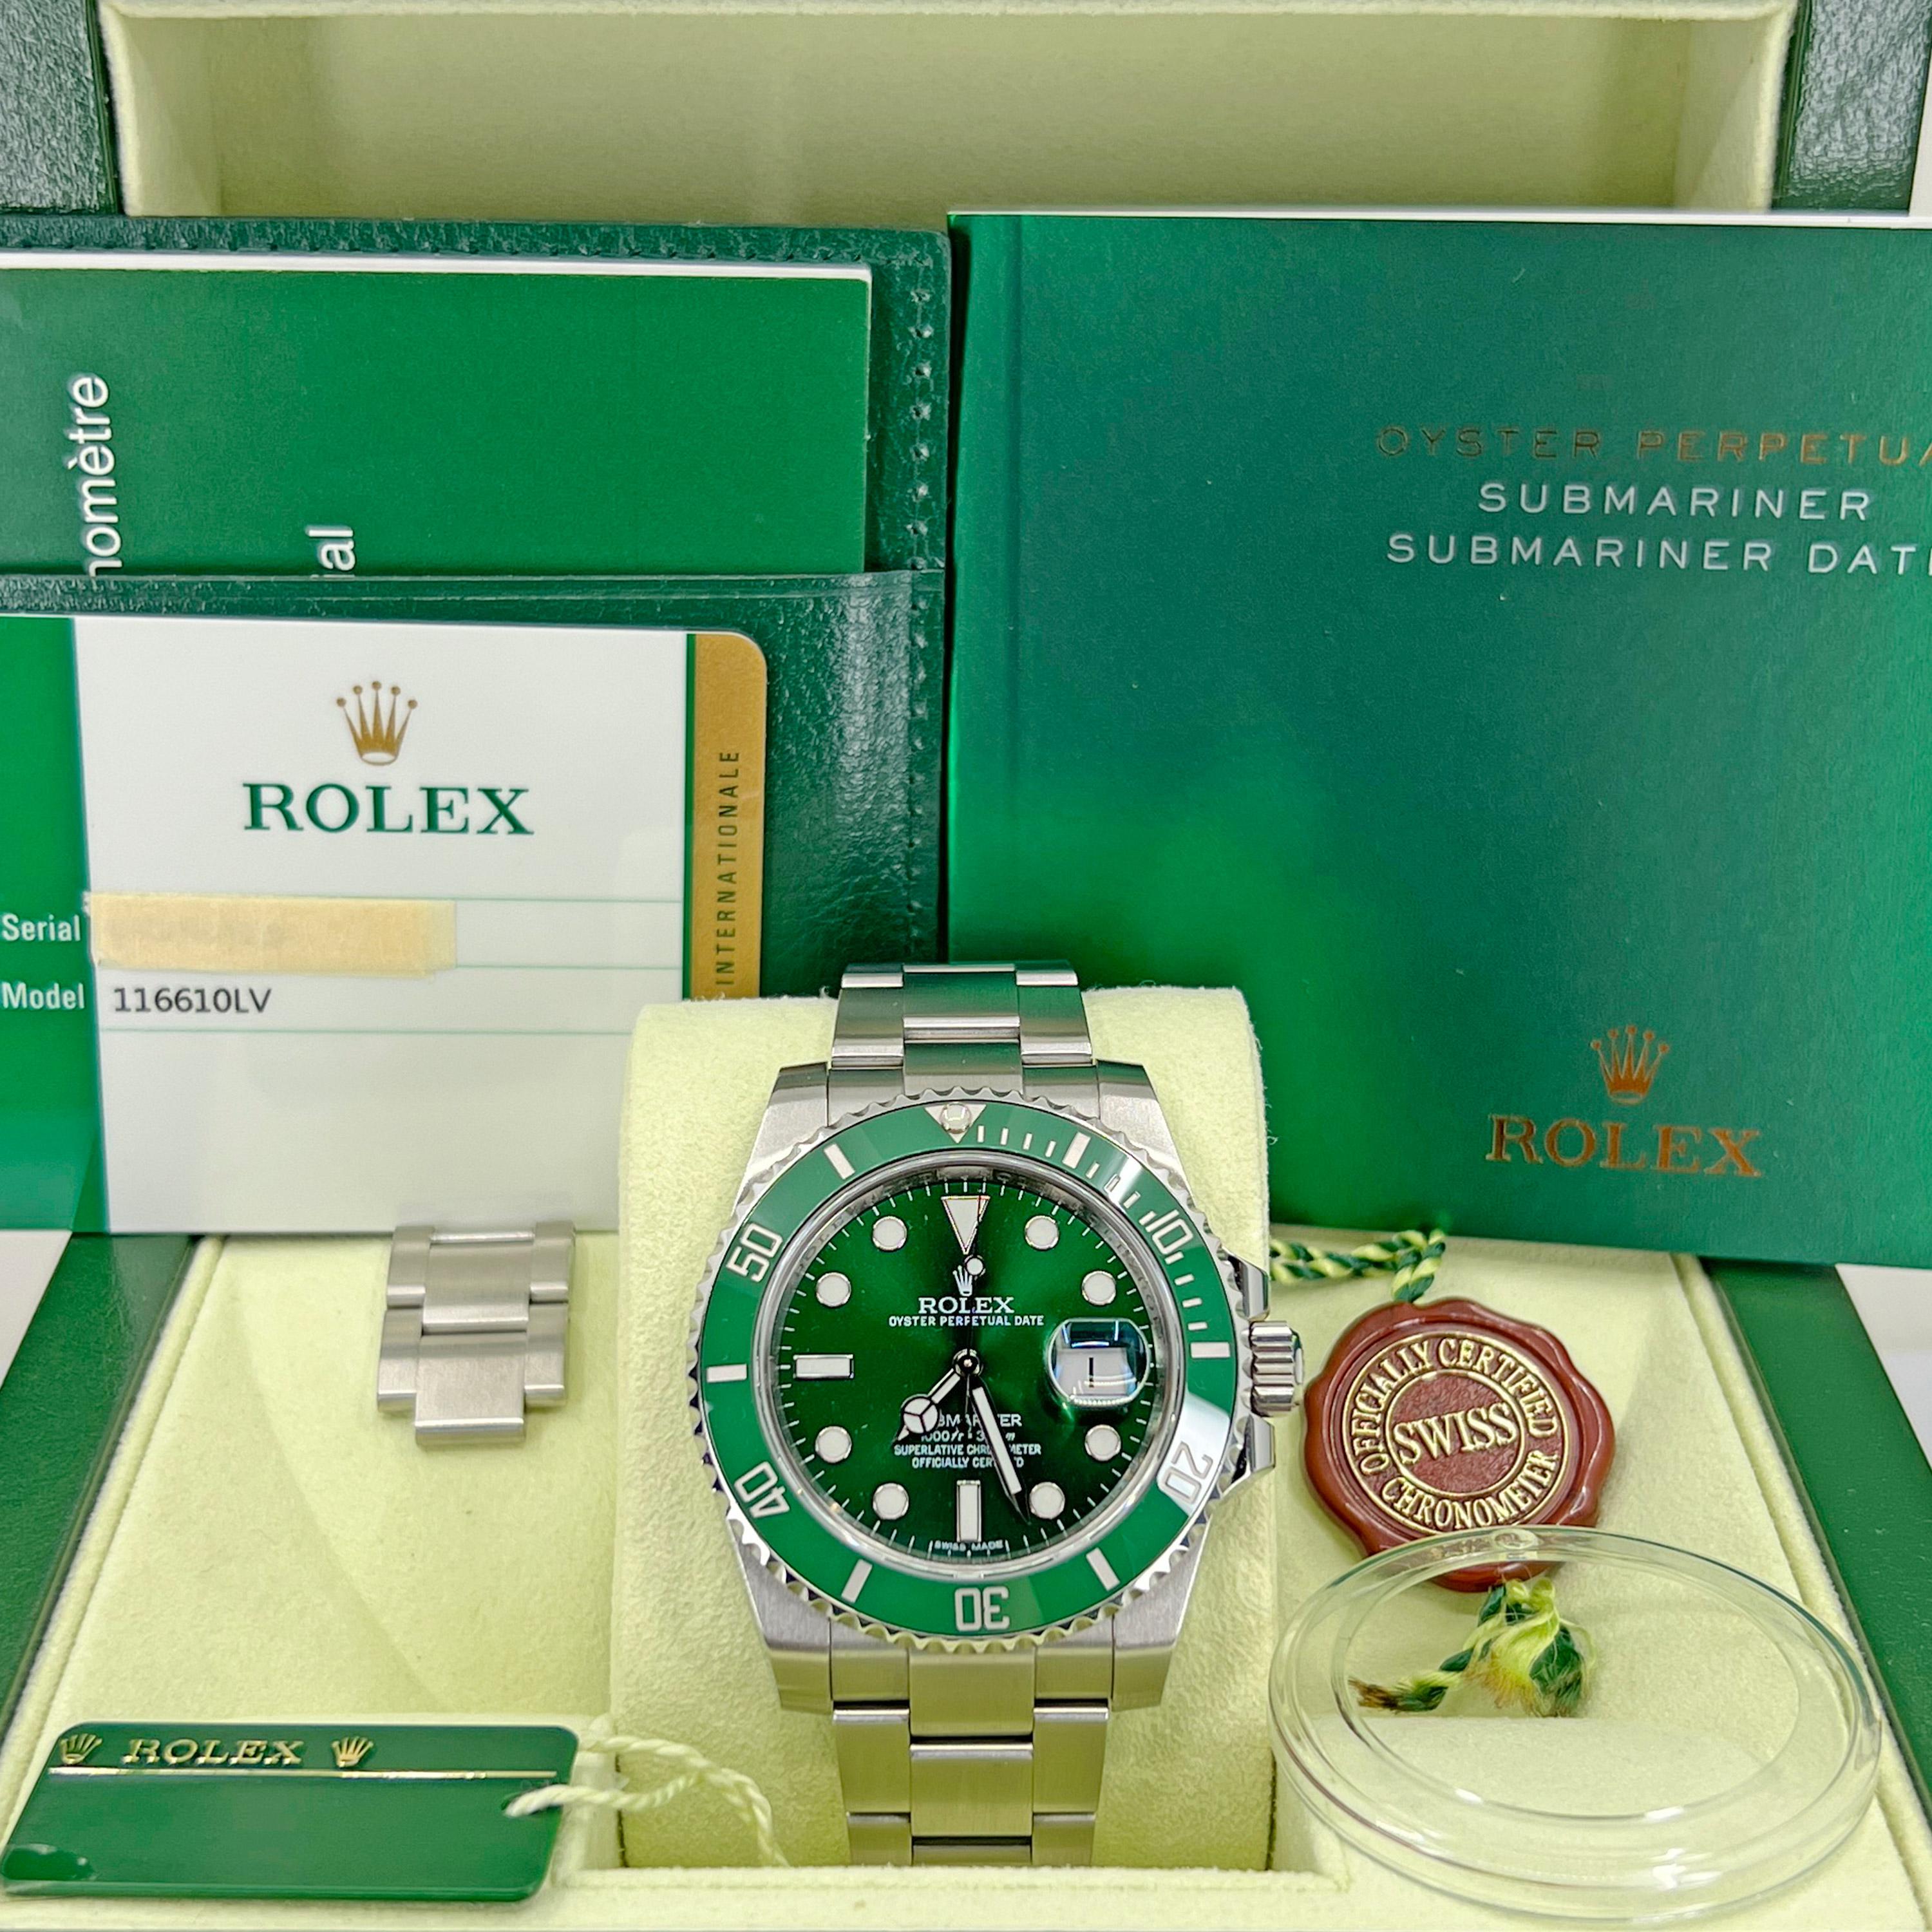 40 mm 904L stainless steel case, unidirectional rotatable Green Cerachrom time-lapse bezel, Green dial, Chromalight luminescent hands and hour markers, and Oyster Glidelock bracelet, clasp Folding Oysterlock safety clasp with Rolex Glidelock